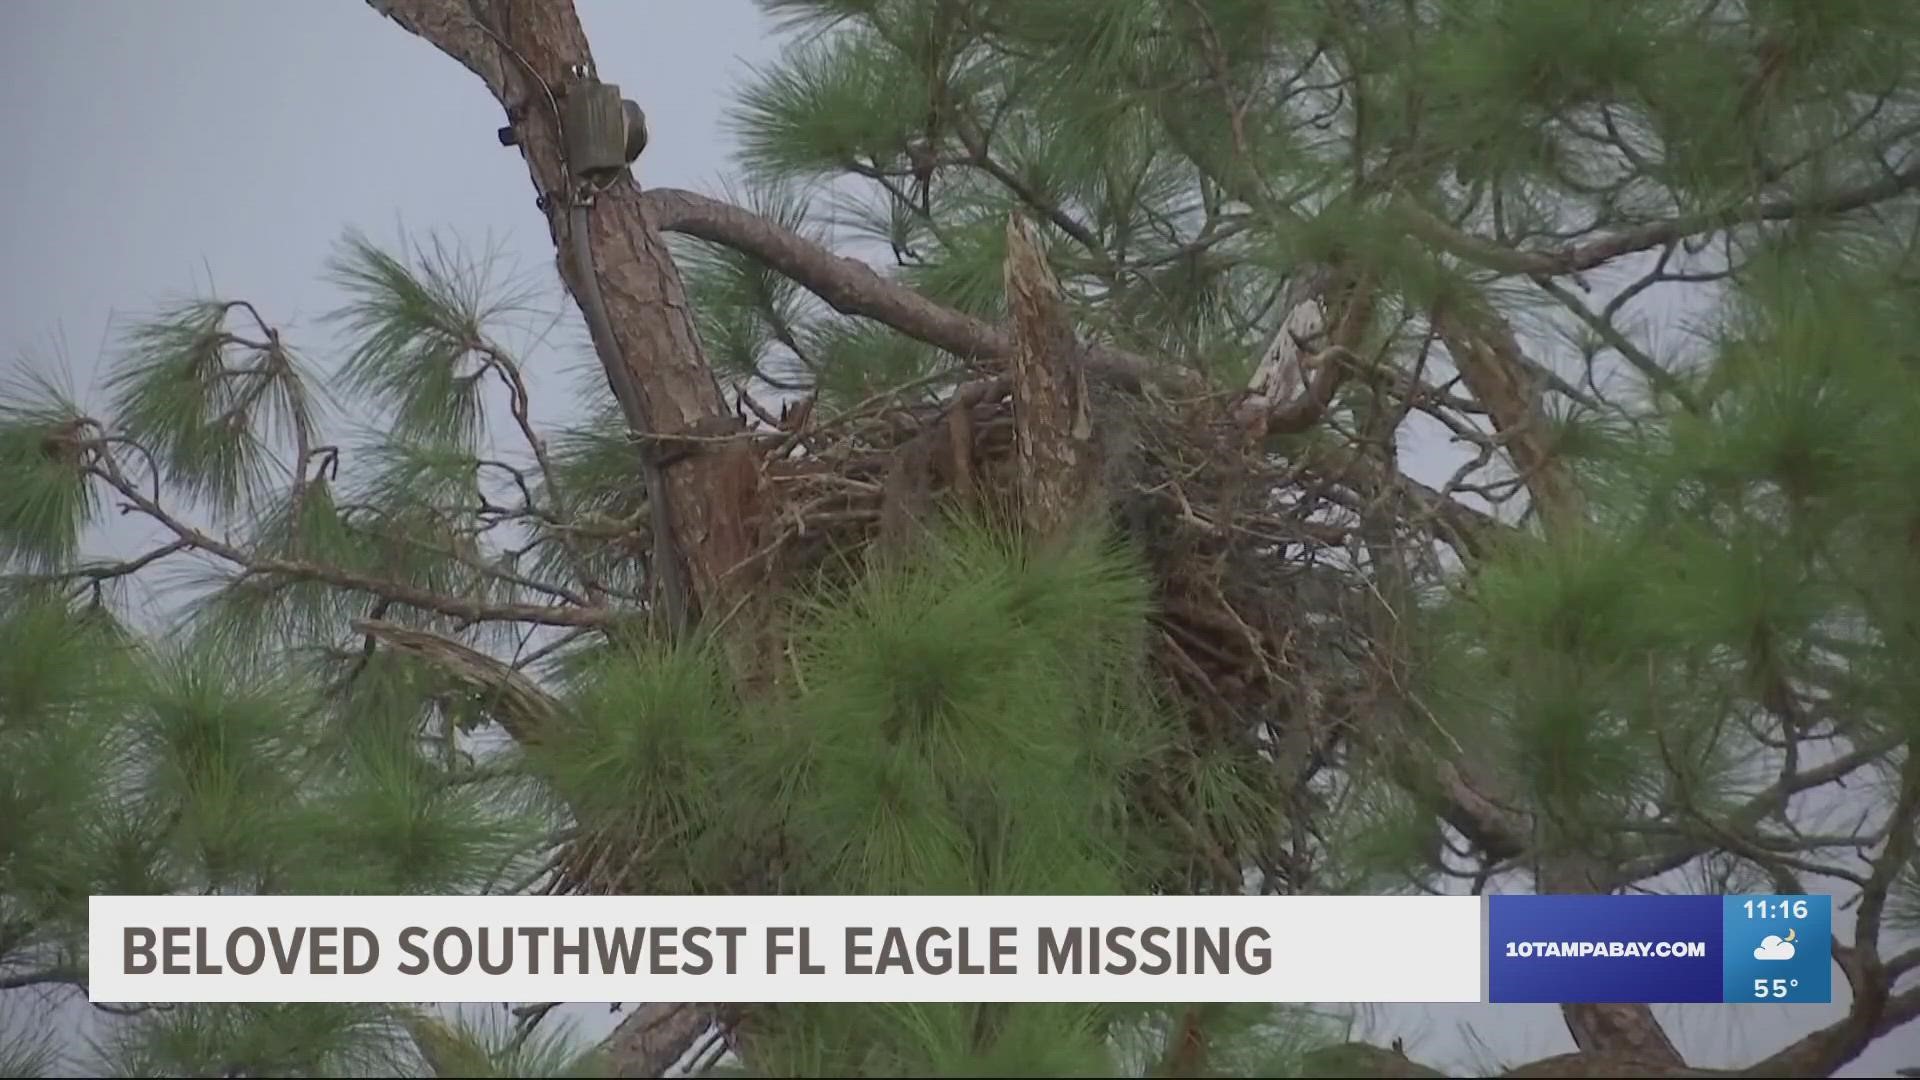 While the mother of the two eaglets – E21 and E22 – remains missing, M-15 is defending and protecting the nest solo.